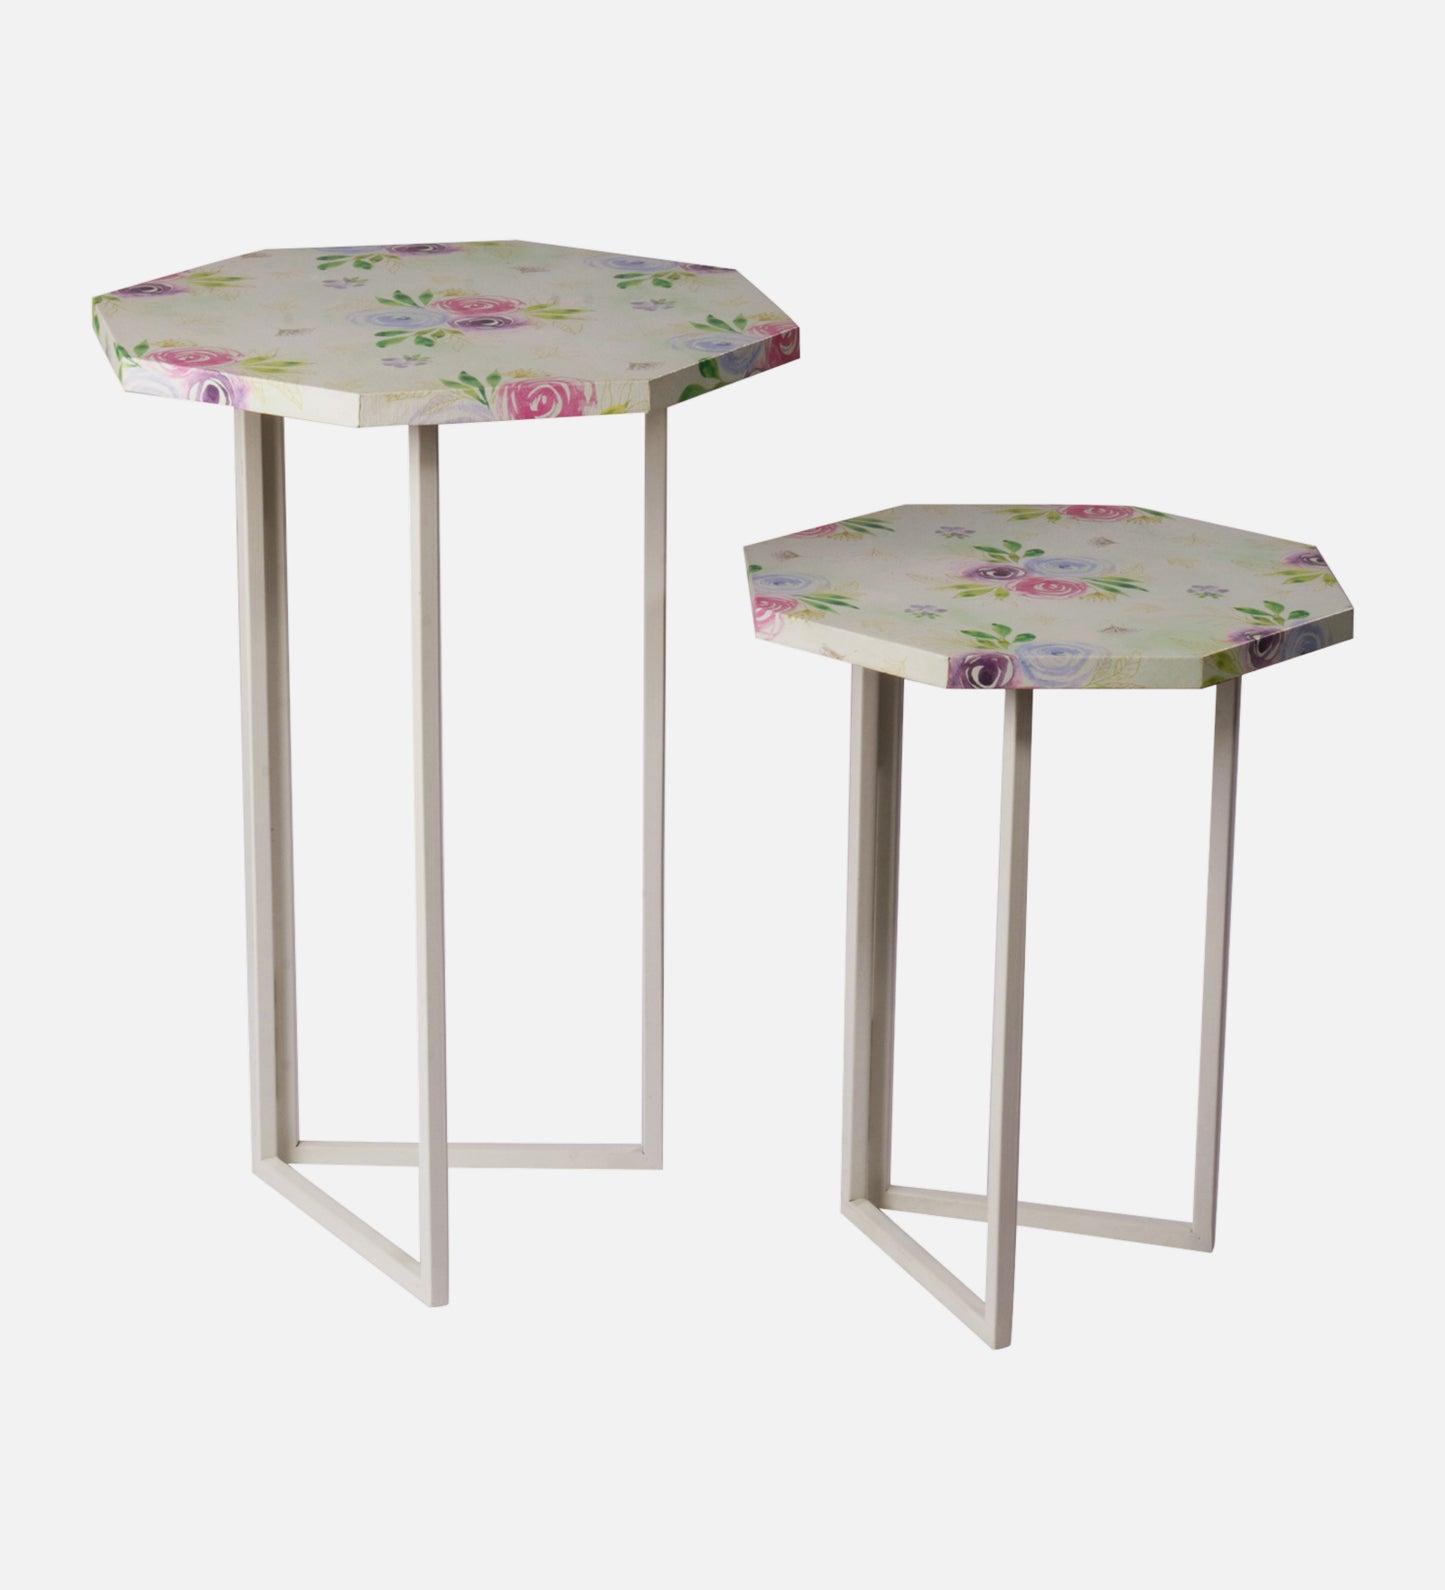 Blush Roses Octagon Oblique Nesting Tables, Side Tables, Wooden Tables, Living Room Decor by A Tiny Mistake